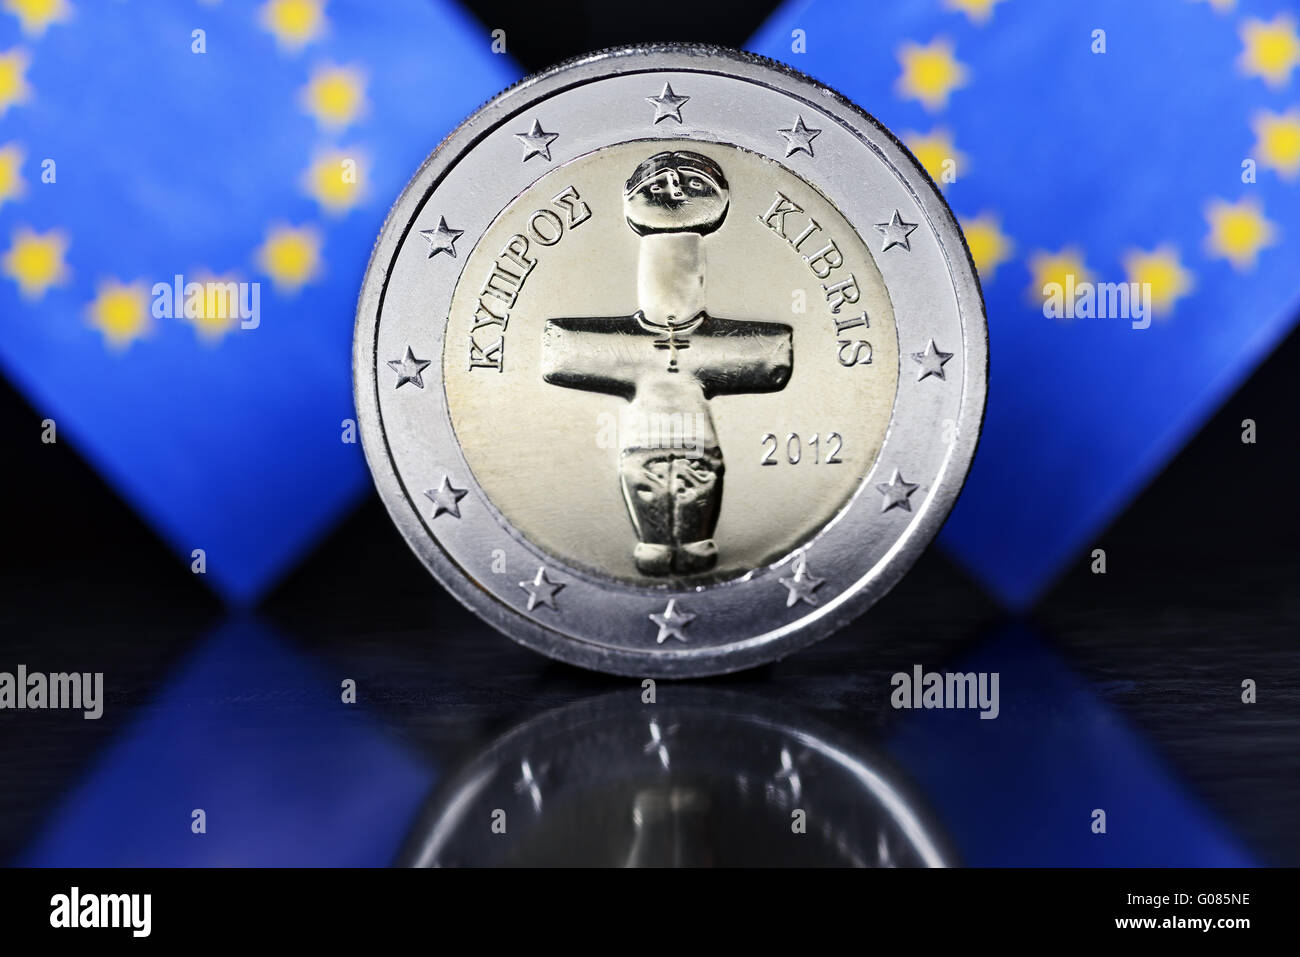 Two euro coin of Cypres and EU banner Stock Photo